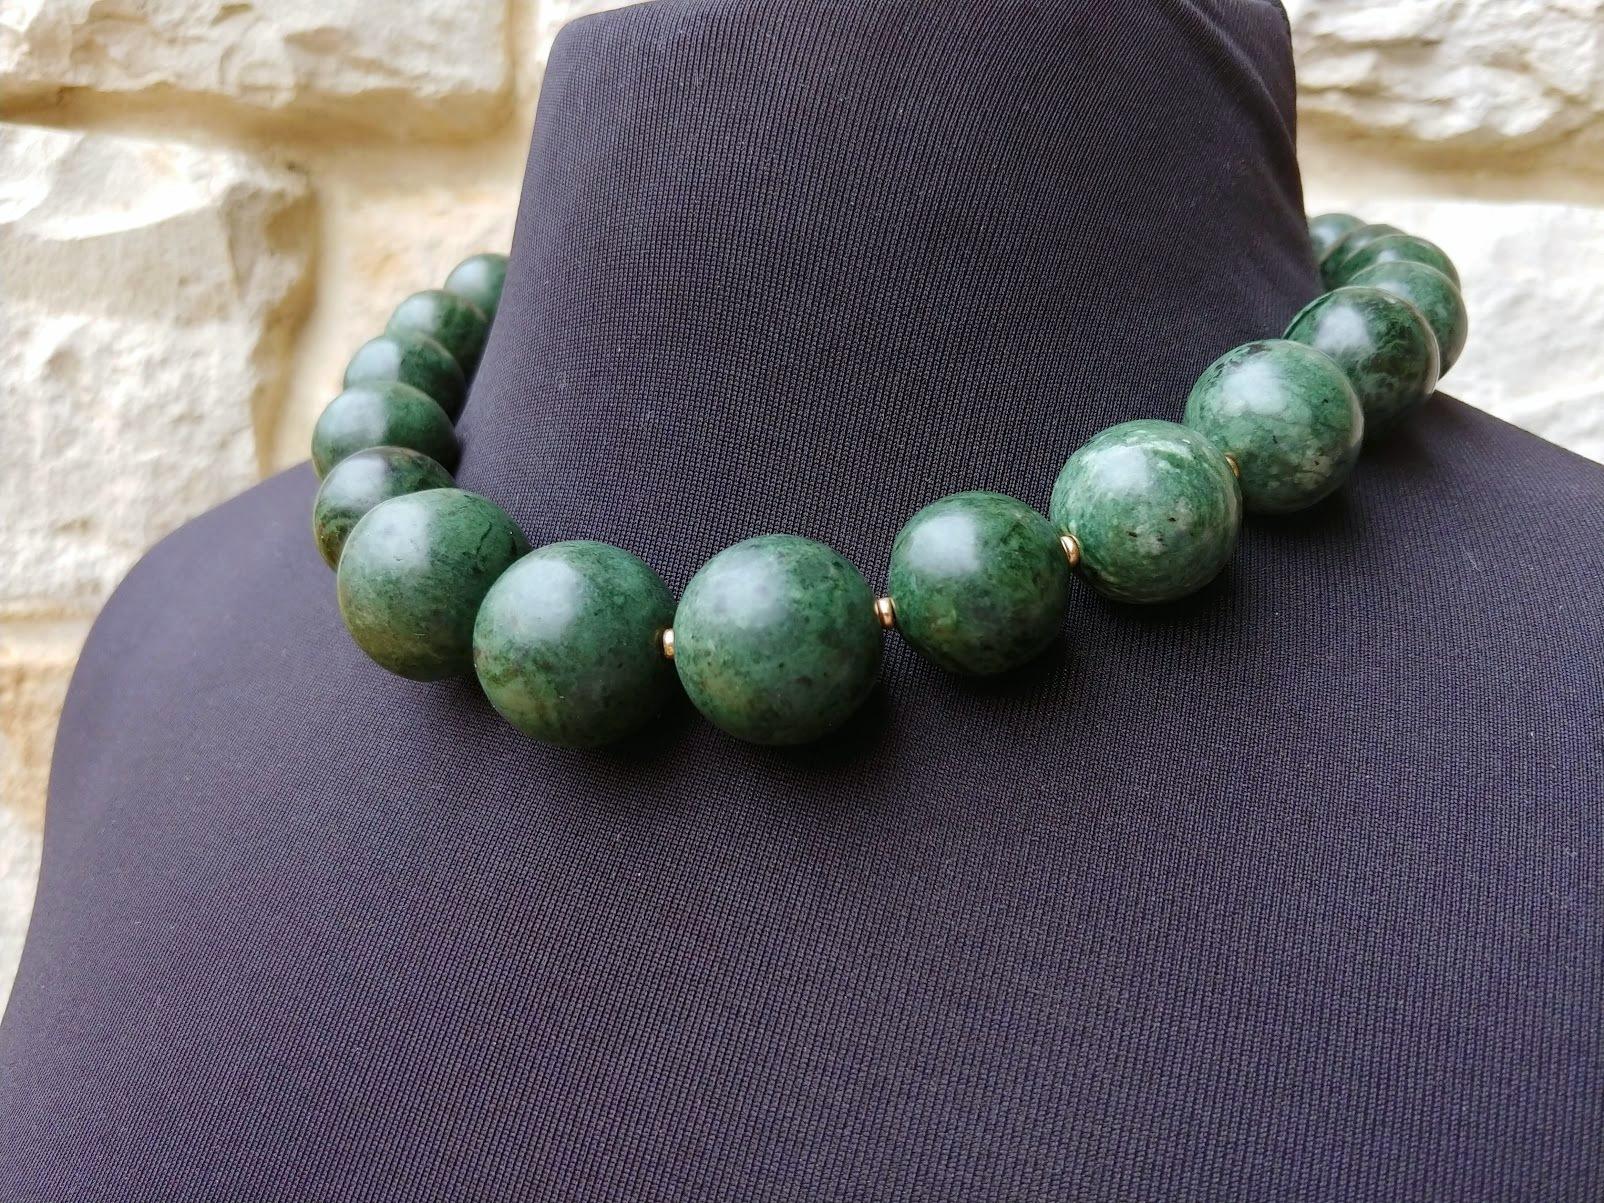 Green Jade Necklace, Eastern Pamir Nephrite In Excellent Condition For Sale In Chesterland, OH